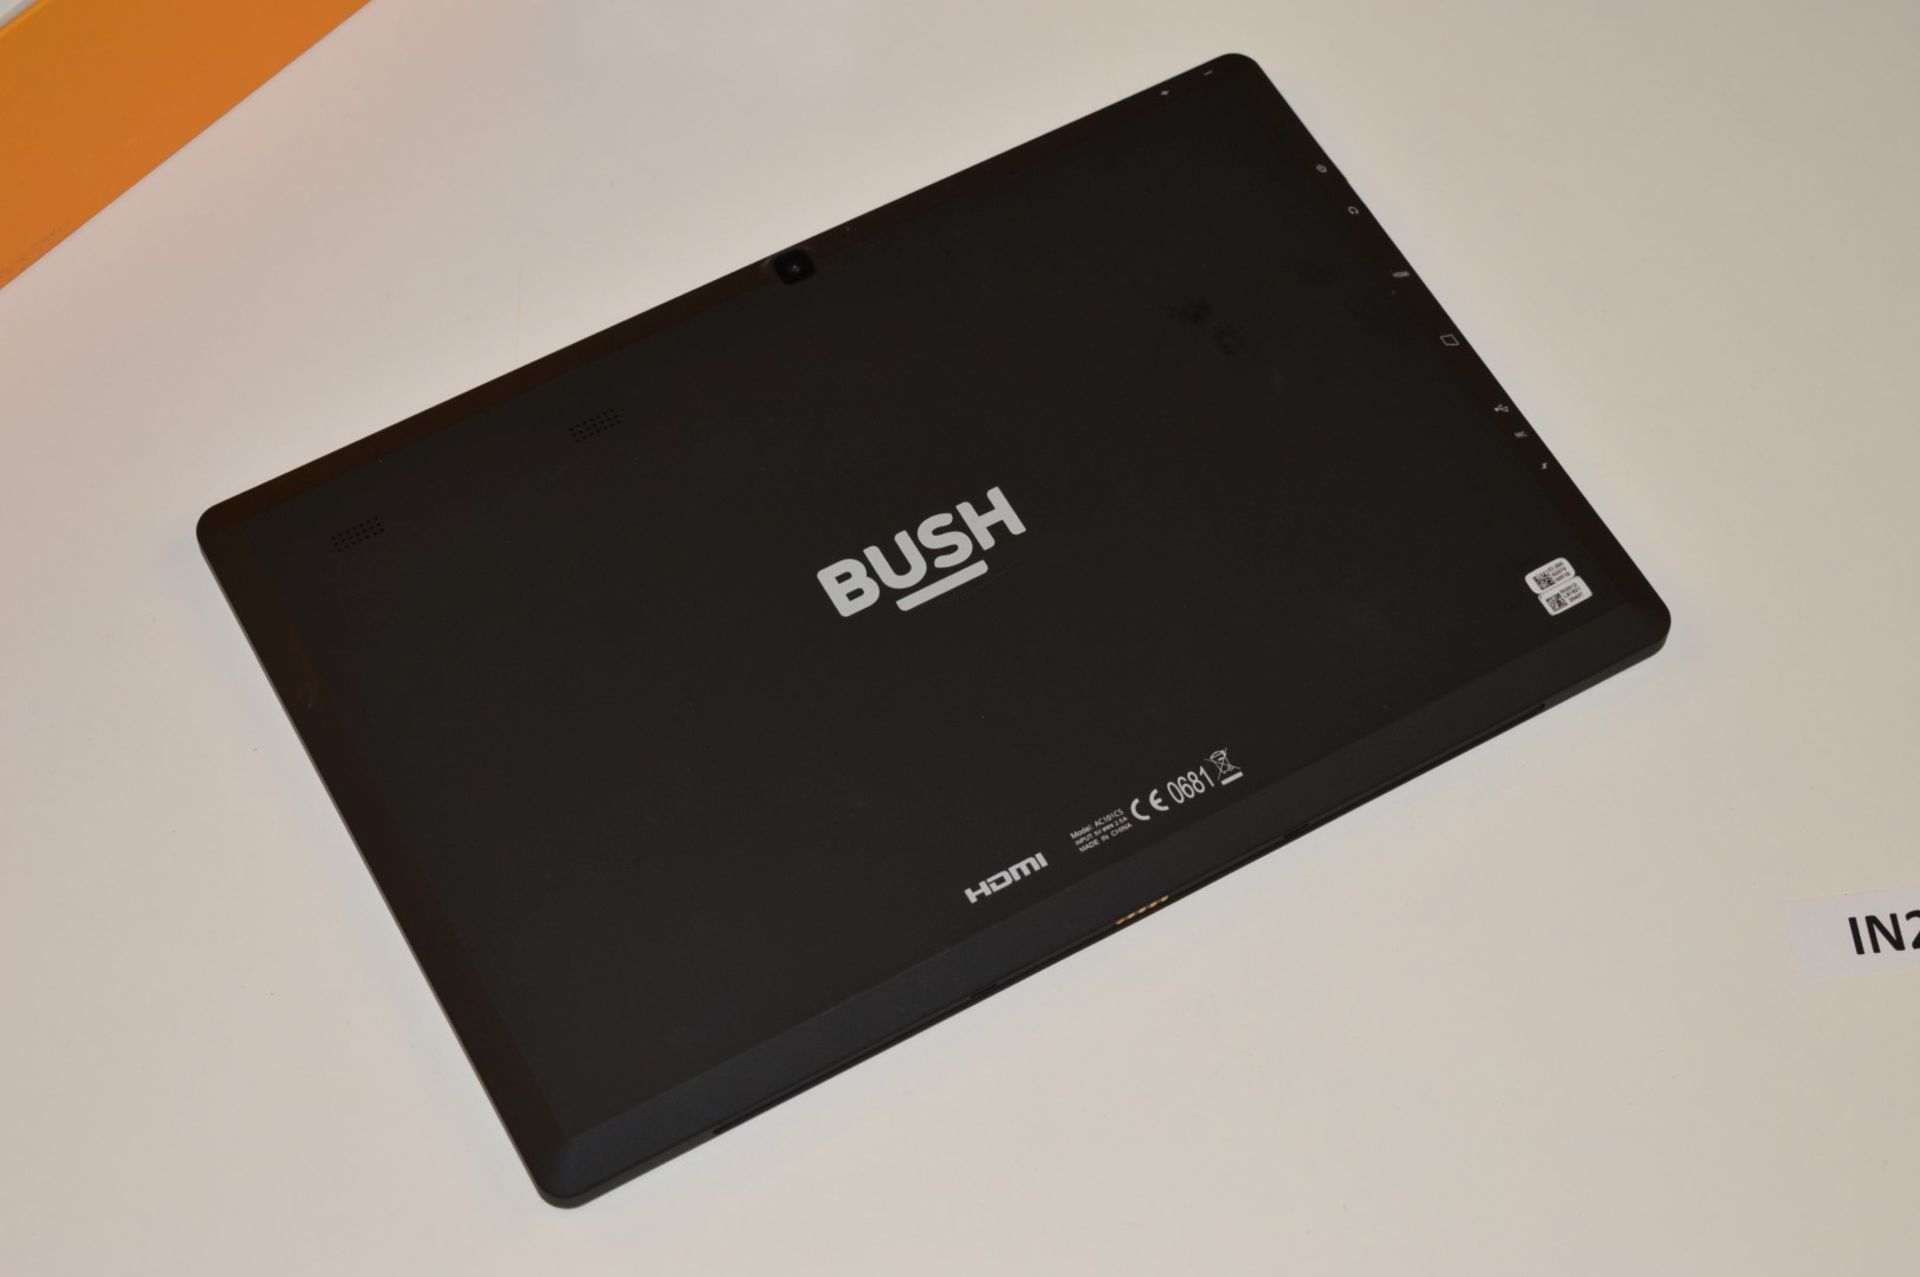 1 x Bush A1 10.1 Inch Windows Tablet - Features Include Intel Atom 1.8ghz Quad Core Processor, 1gb - Image 5 of 11